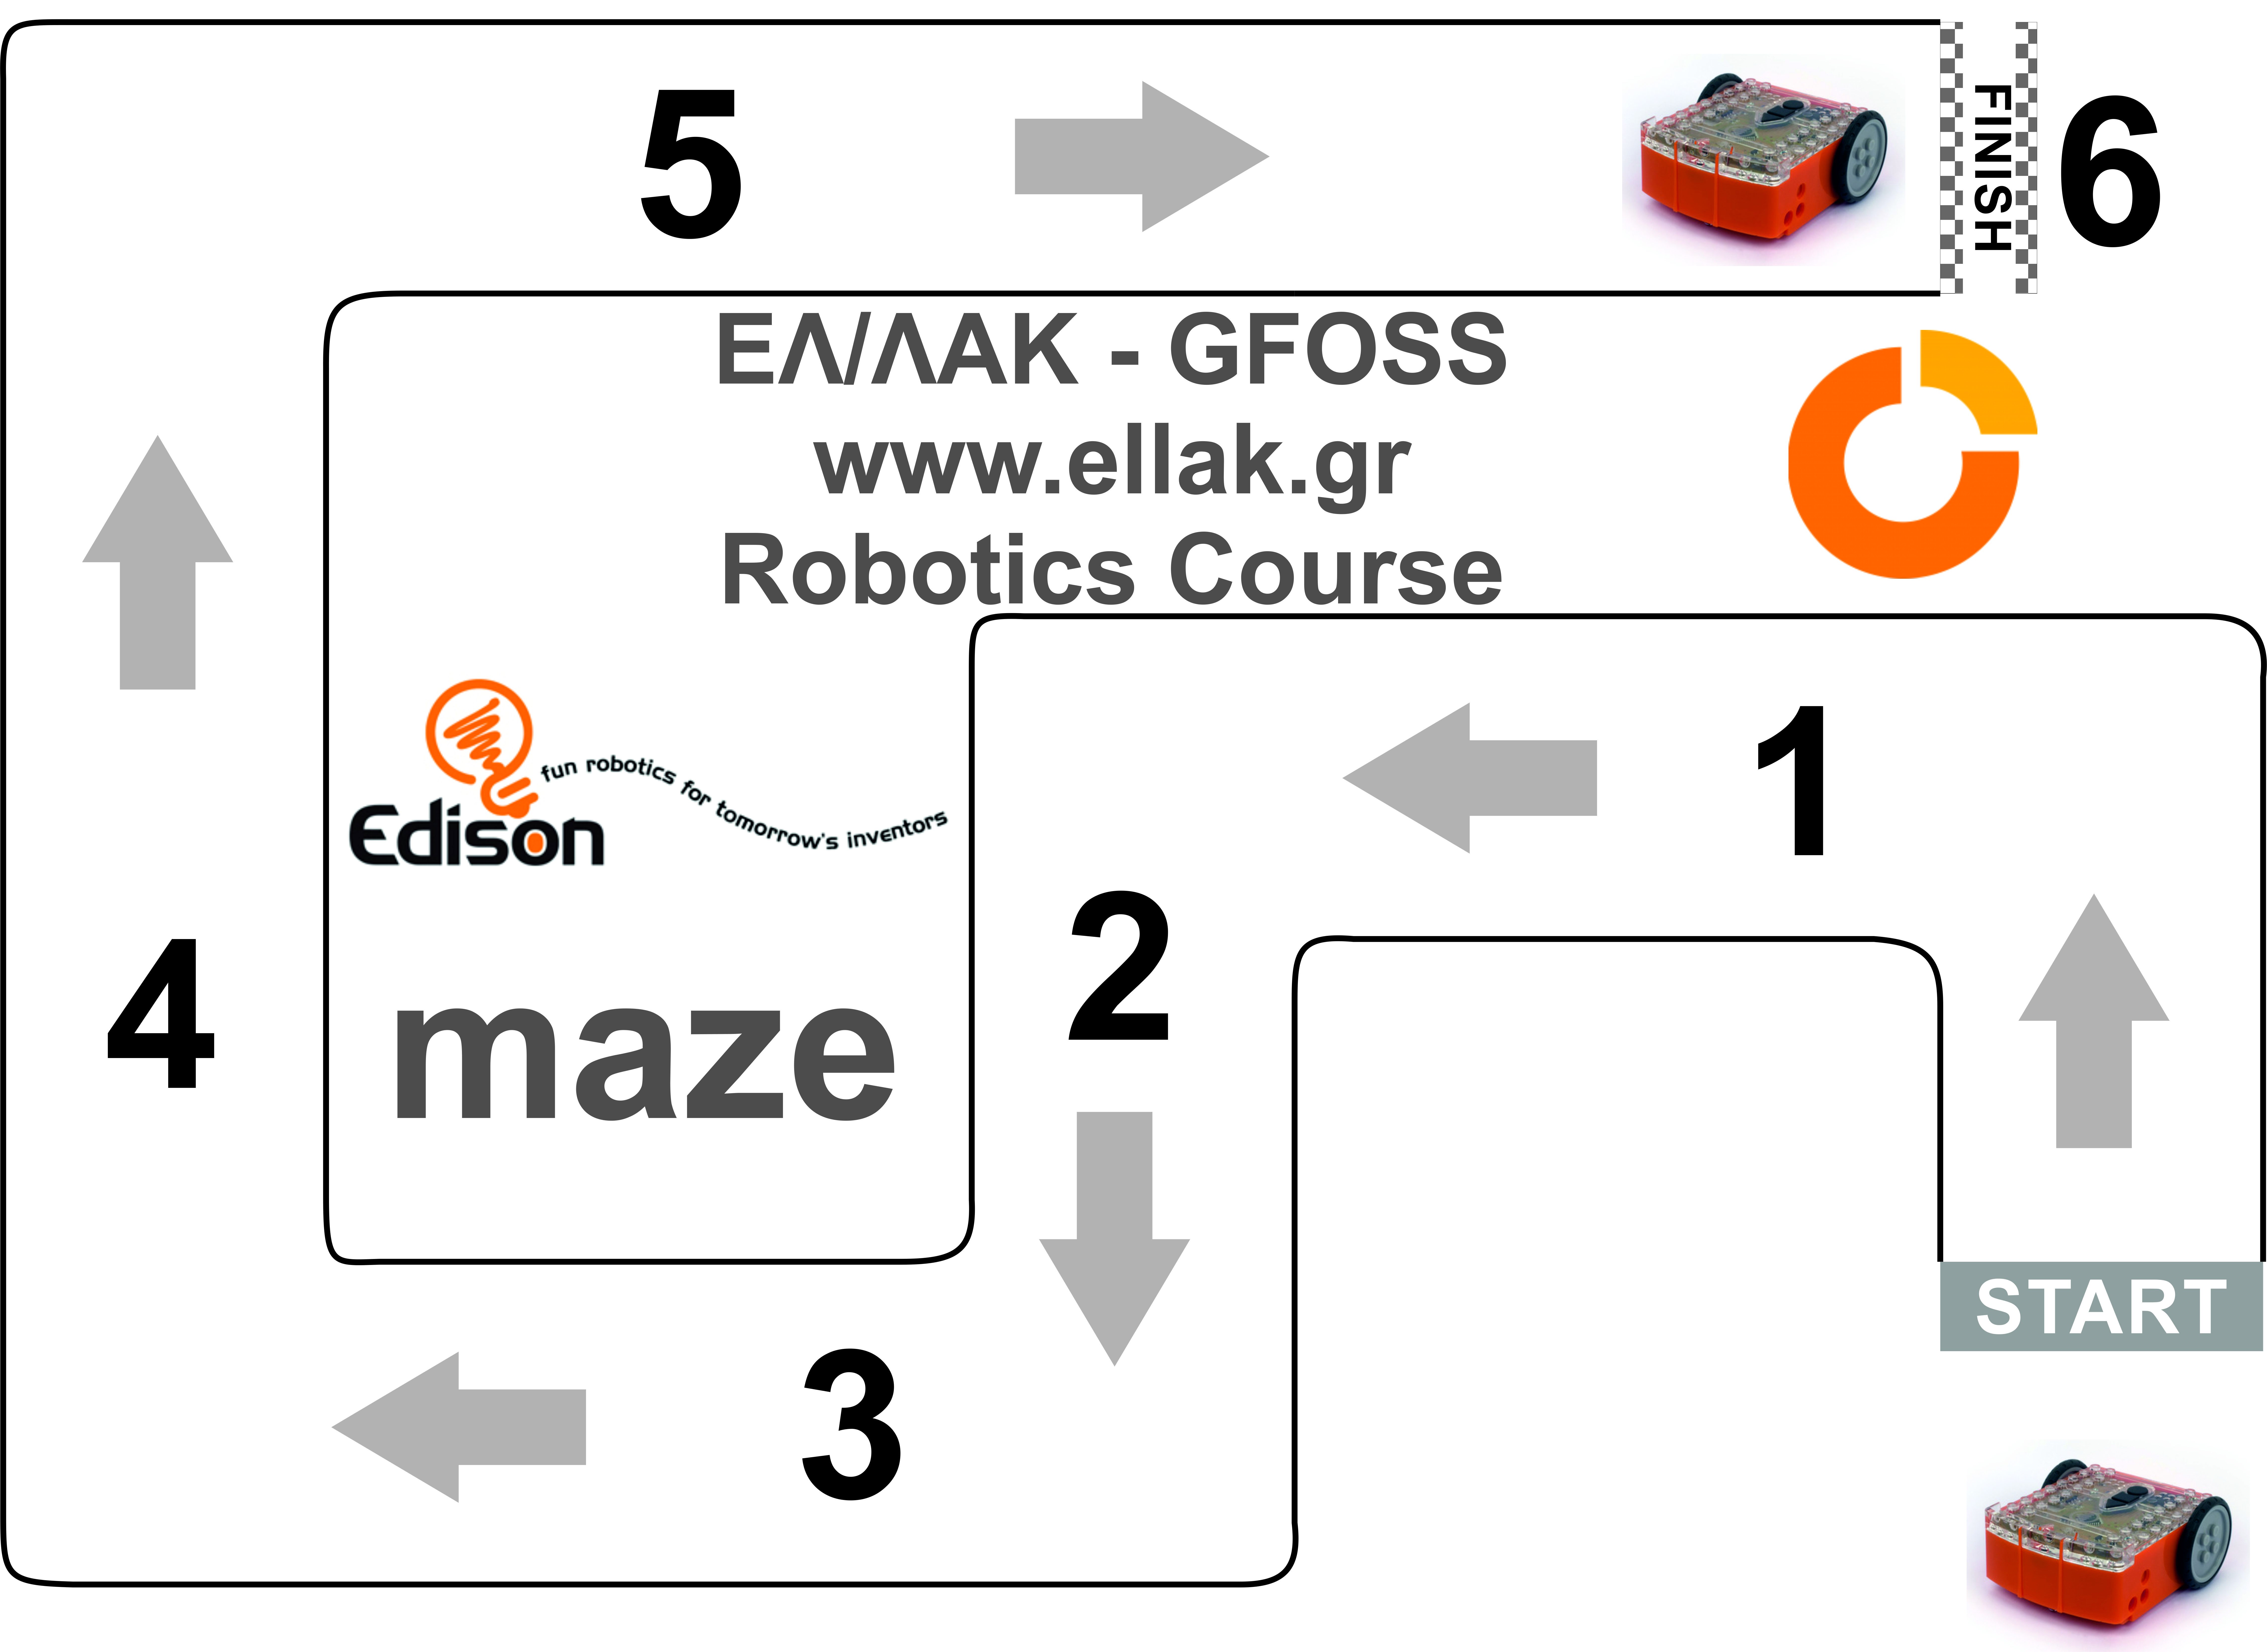 Robotics - 3D Printing - Internet of Things: Day 2 - Challenge - the Edison into Mazes